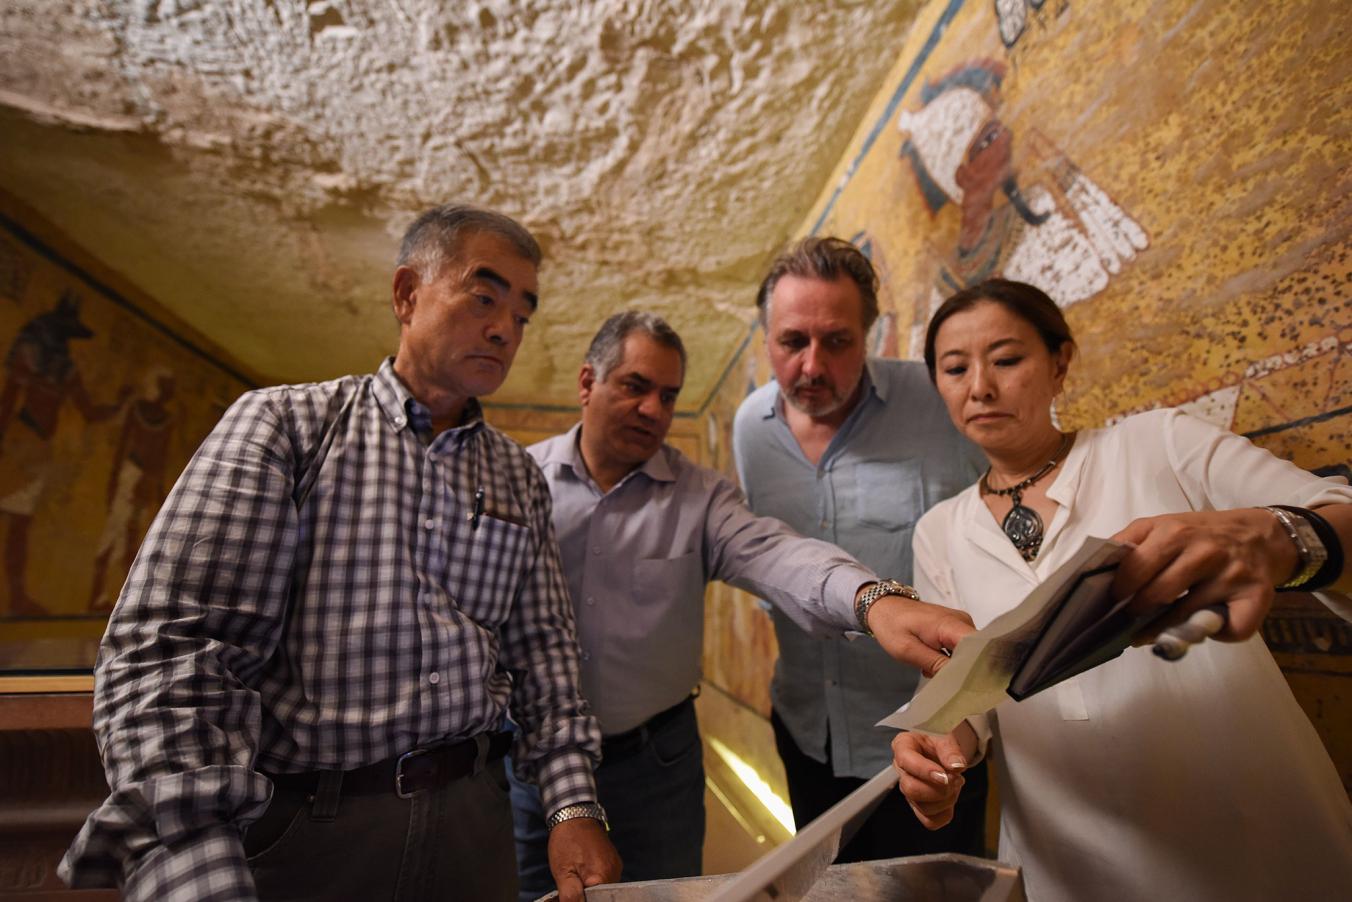 Hirokatsu Watanabe, Mamdouh Eldamaty, the Egyptian antiquities minister, and archaeologists Nicholas Reeves and Yumiko Ueno study an image of a painted wall scene. PHOTO: Brando Quilici, National Geographic